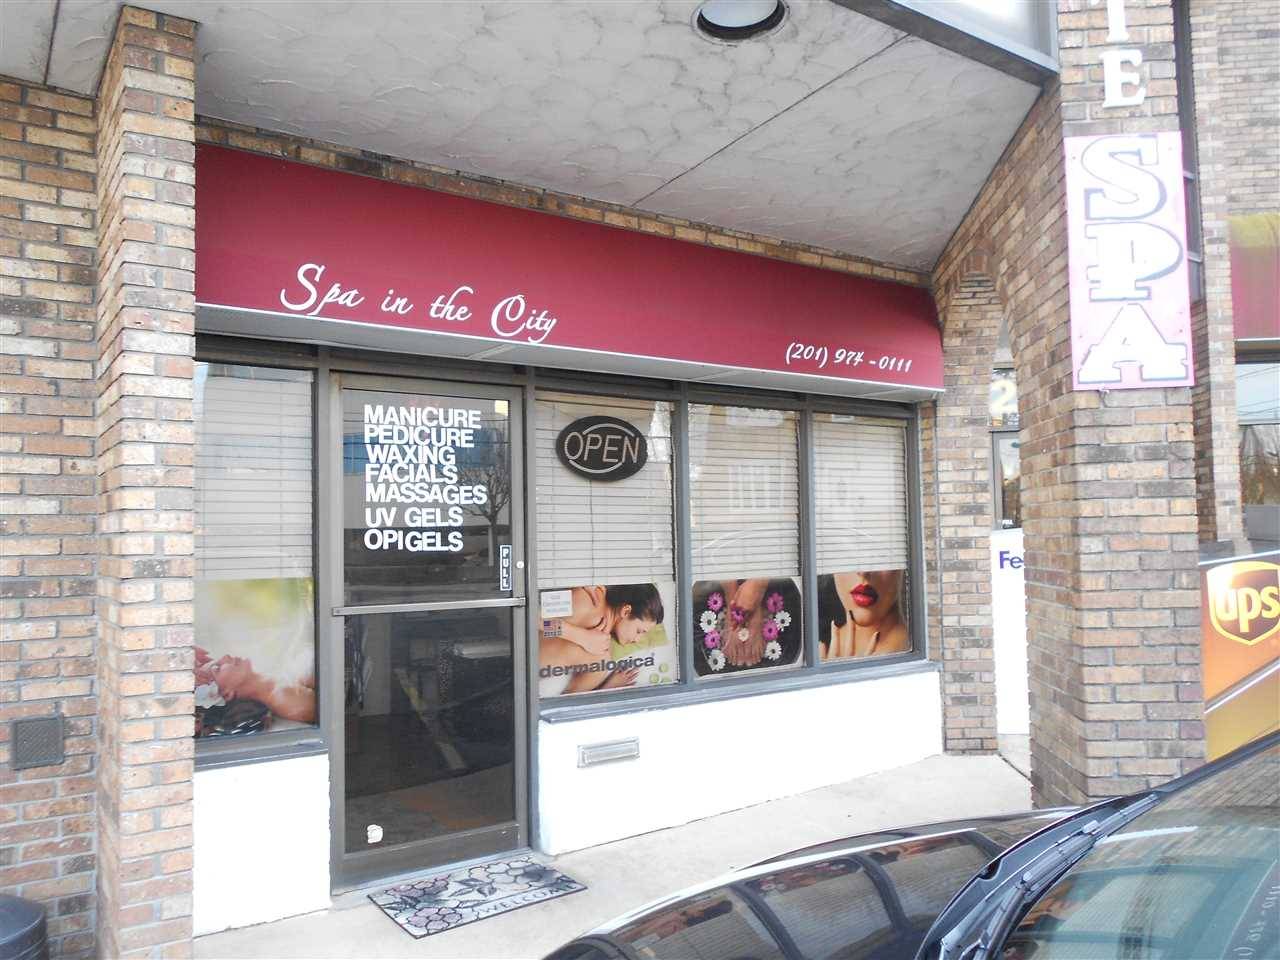 FULLY OPERATIONAL SPA OPERATION-CENTER OF TOWN - Retail New Jersey